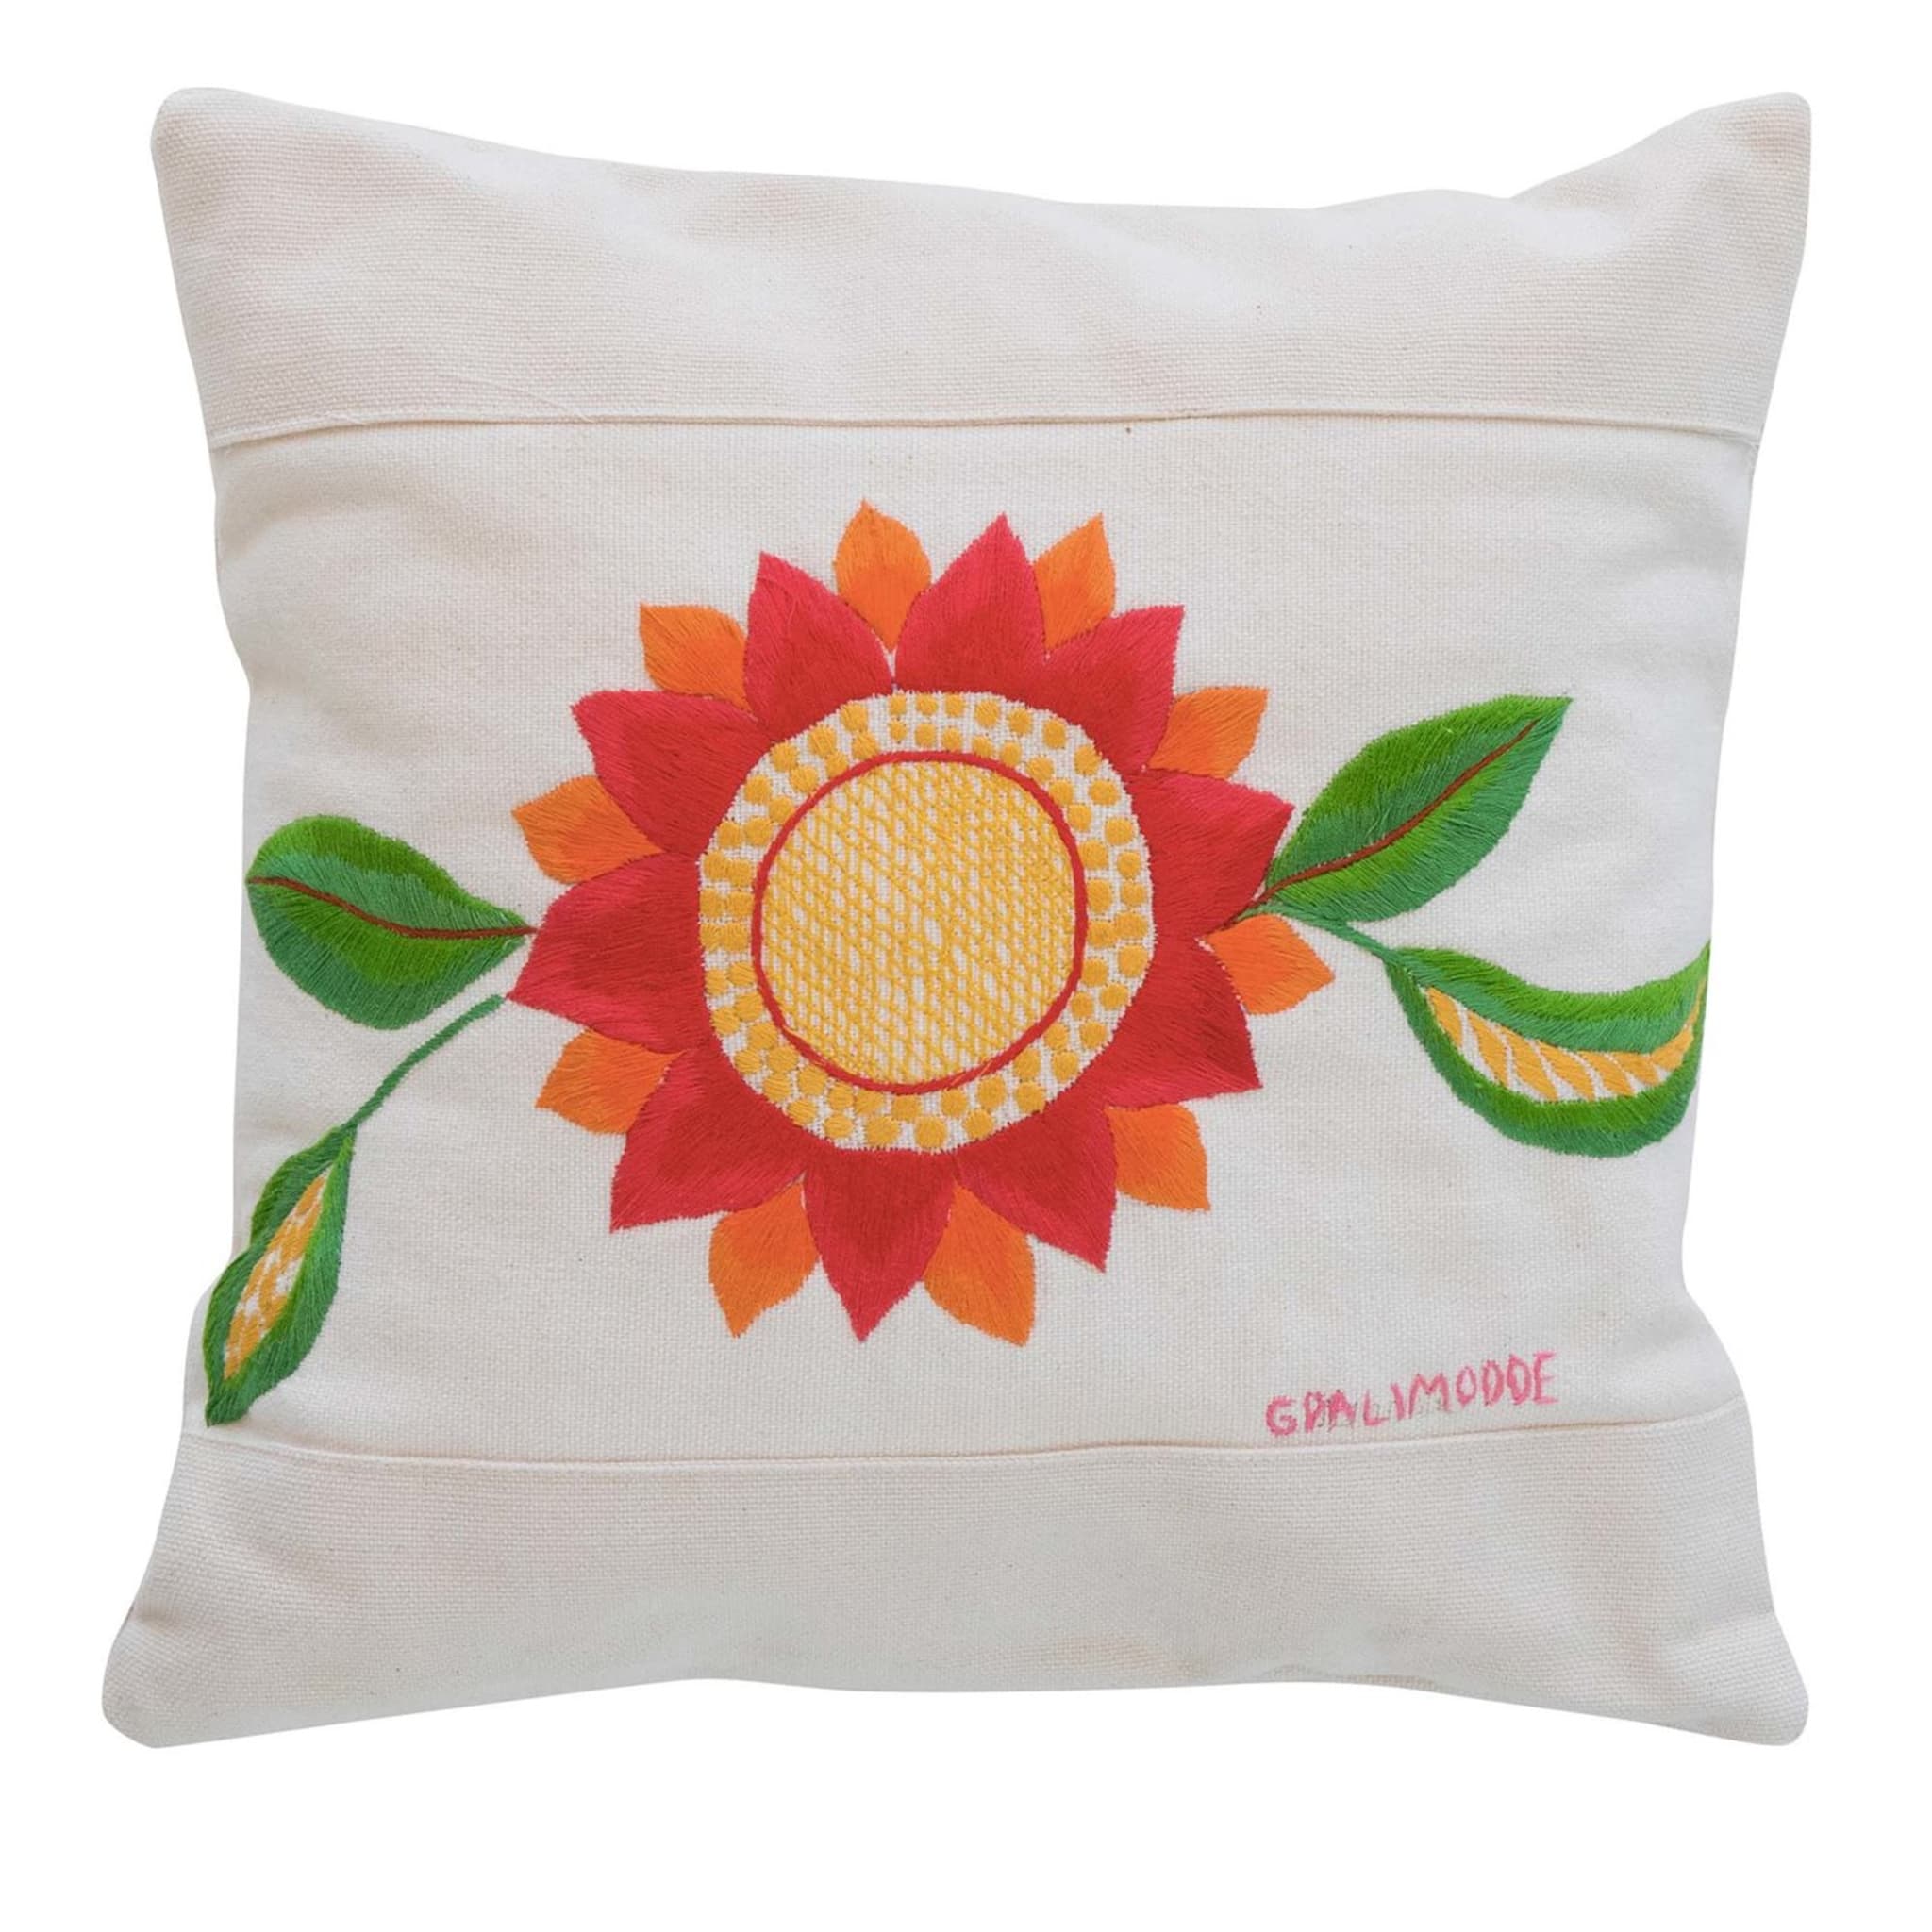 Embroidered Sunflower Cushion - Main view